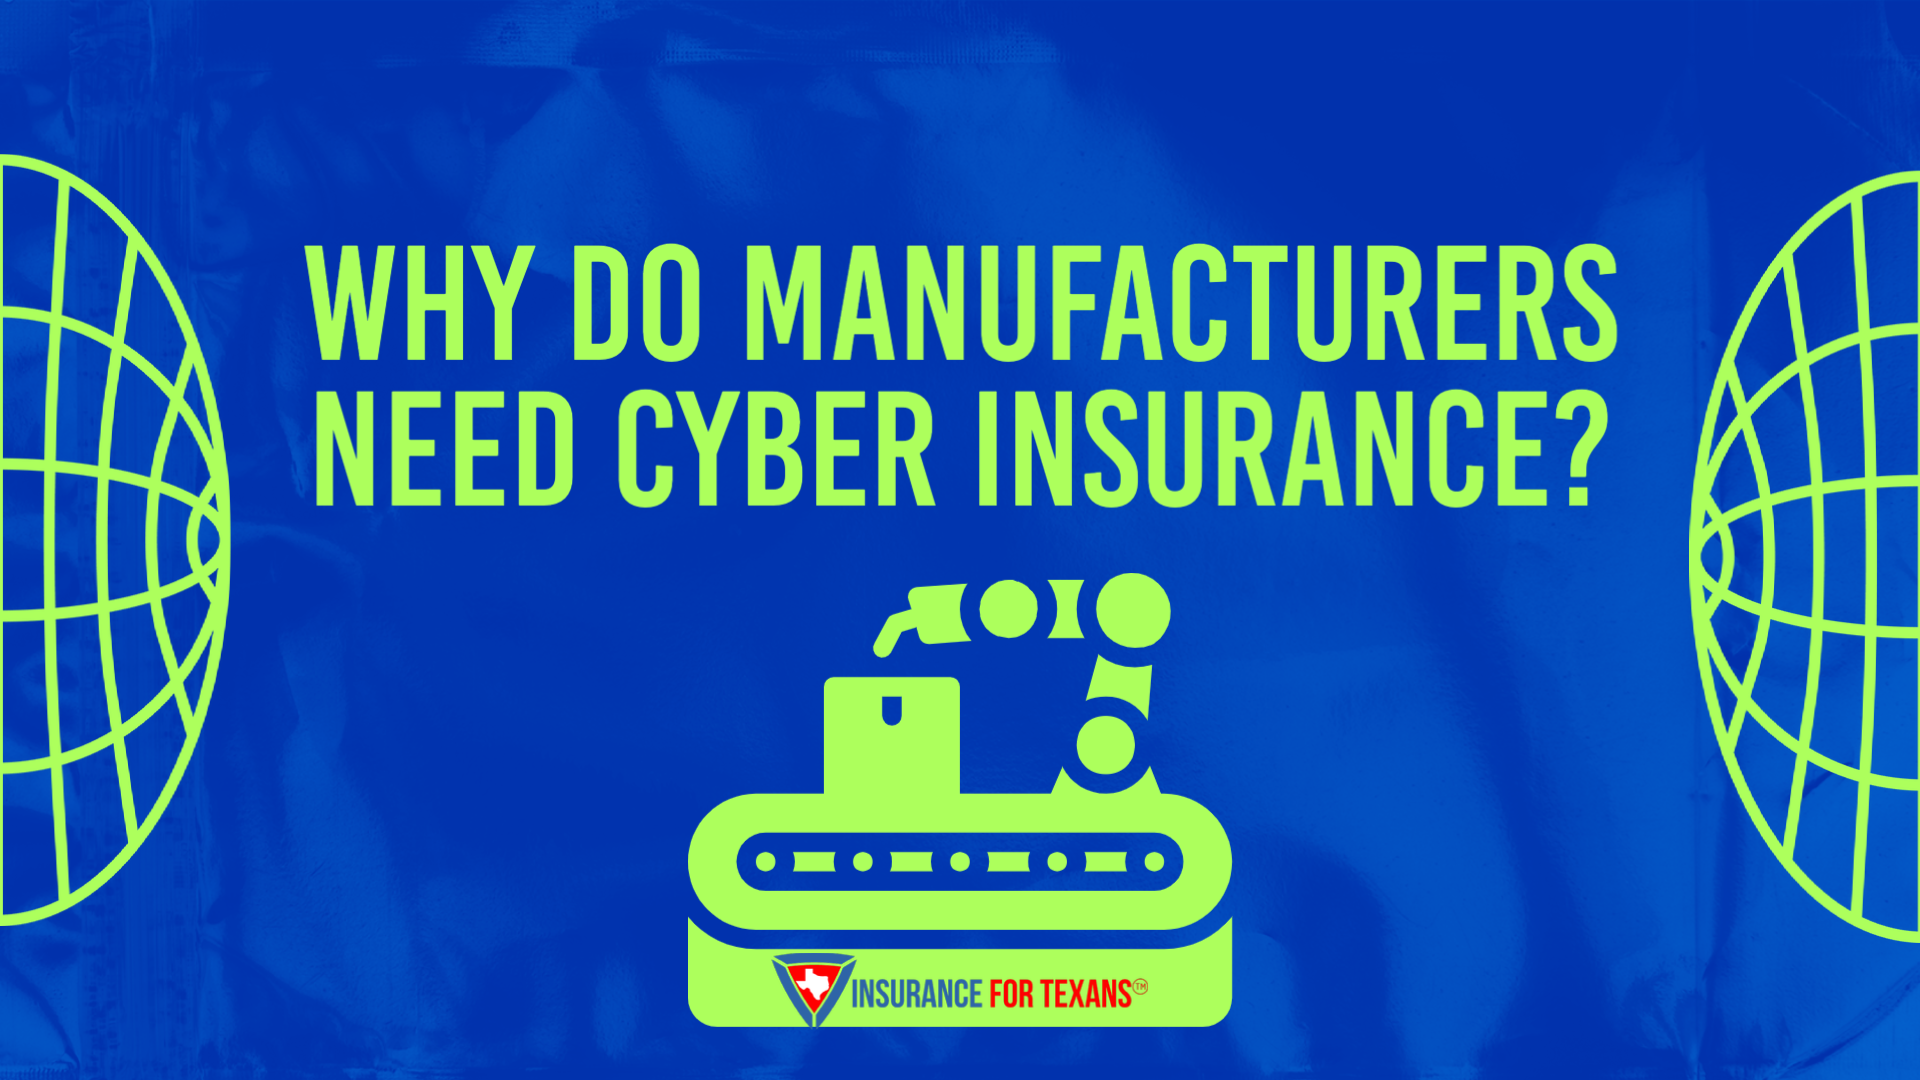 Why Do Manufacturers Need Cyber Insurance?